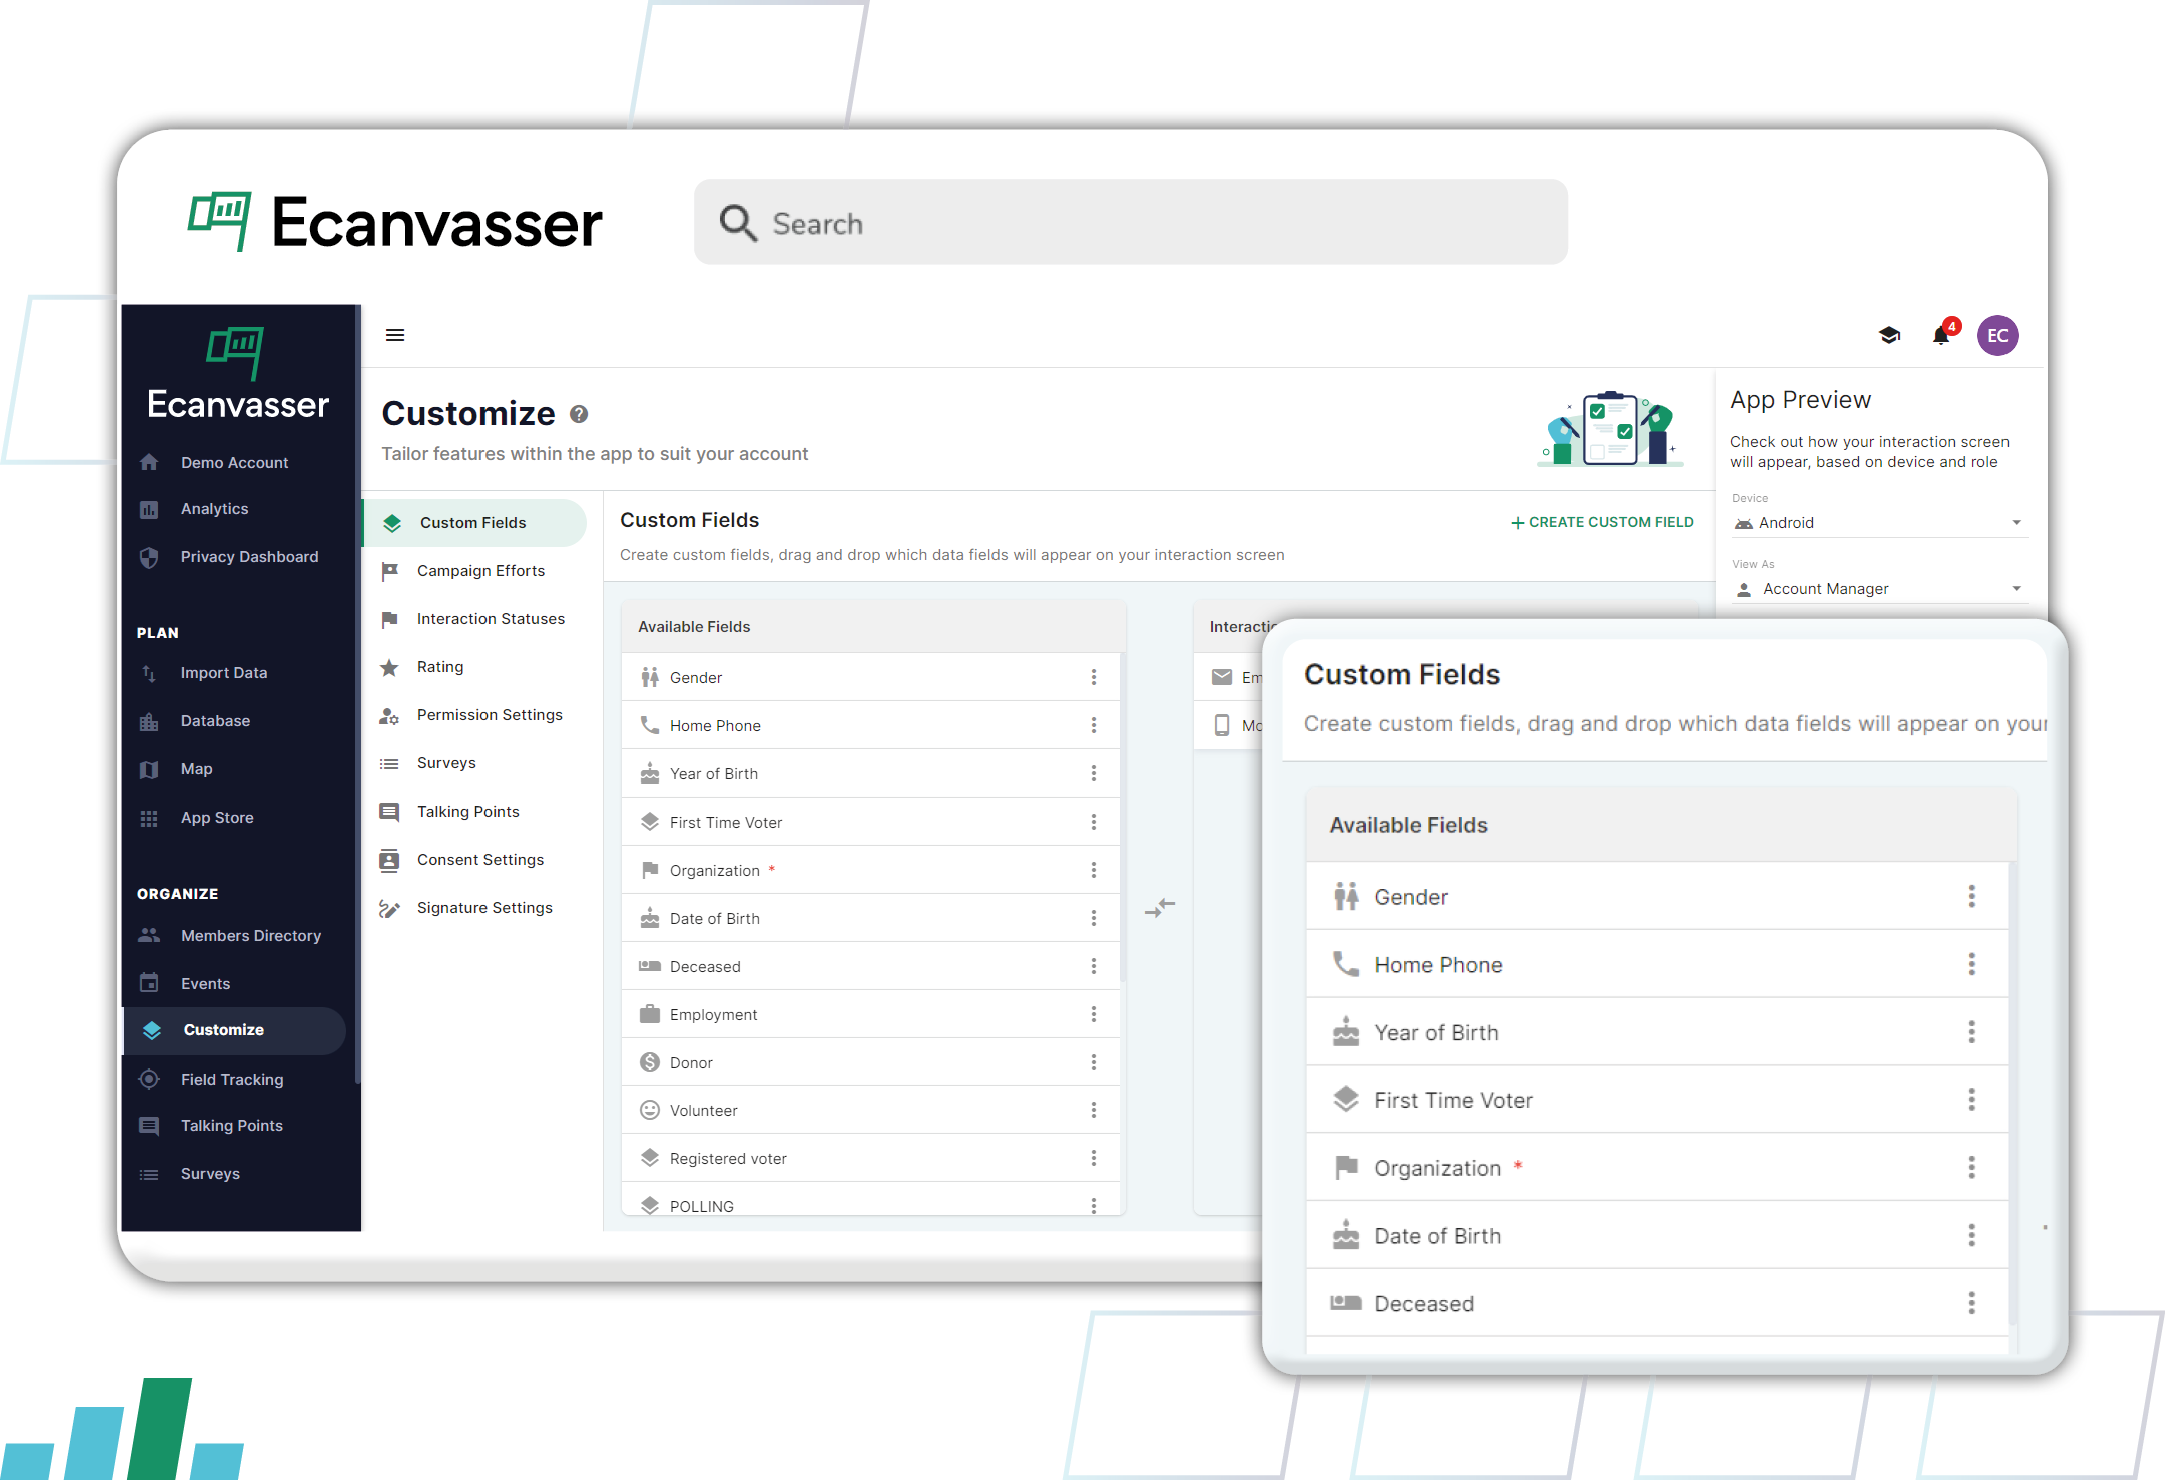 Planning campaigns has never been easier. Create and customize databases for your organization with a simple, drag-and-drop interface.